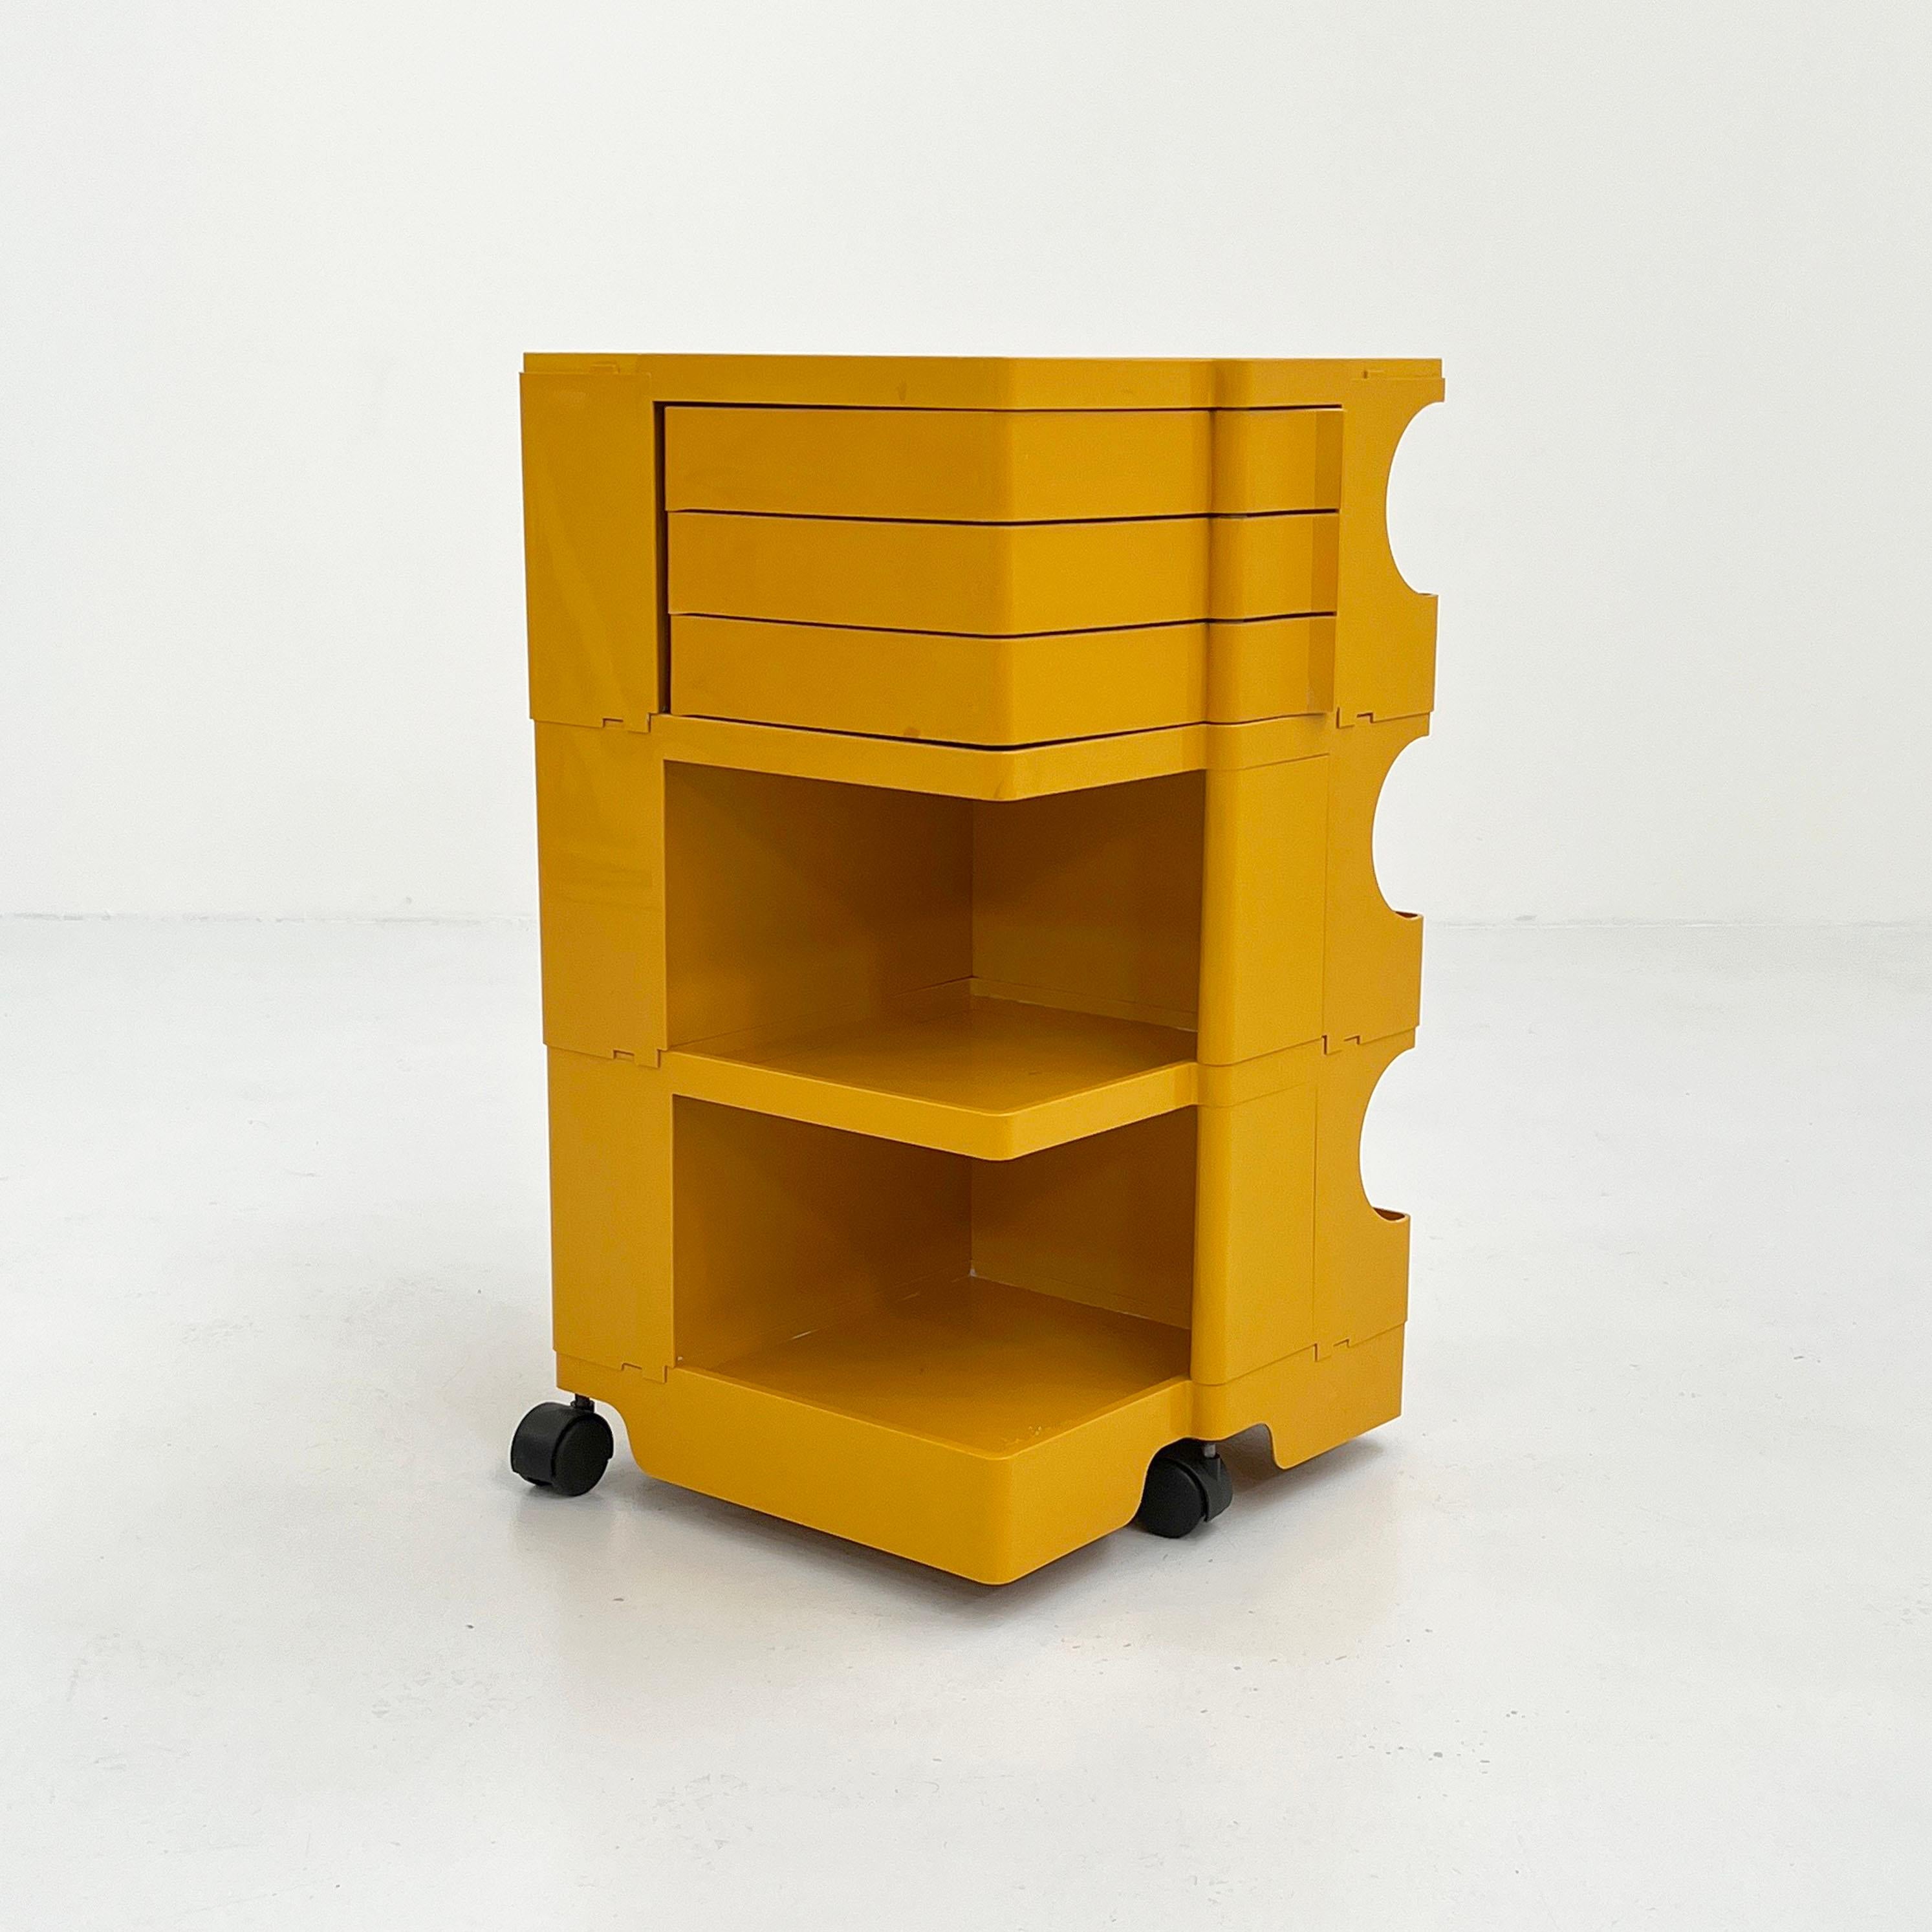 Yellow Boby Trolley by Joe Colombo for Bieffeplast, 1960s
Designer - Joe Colombo 
Producer - Bieffeplast
Model - Boby Trolley
Design Period - Sixties
Measurements - width 41 cm x depth 39 cm x height 74 cm
Materials - Plastic
Color -